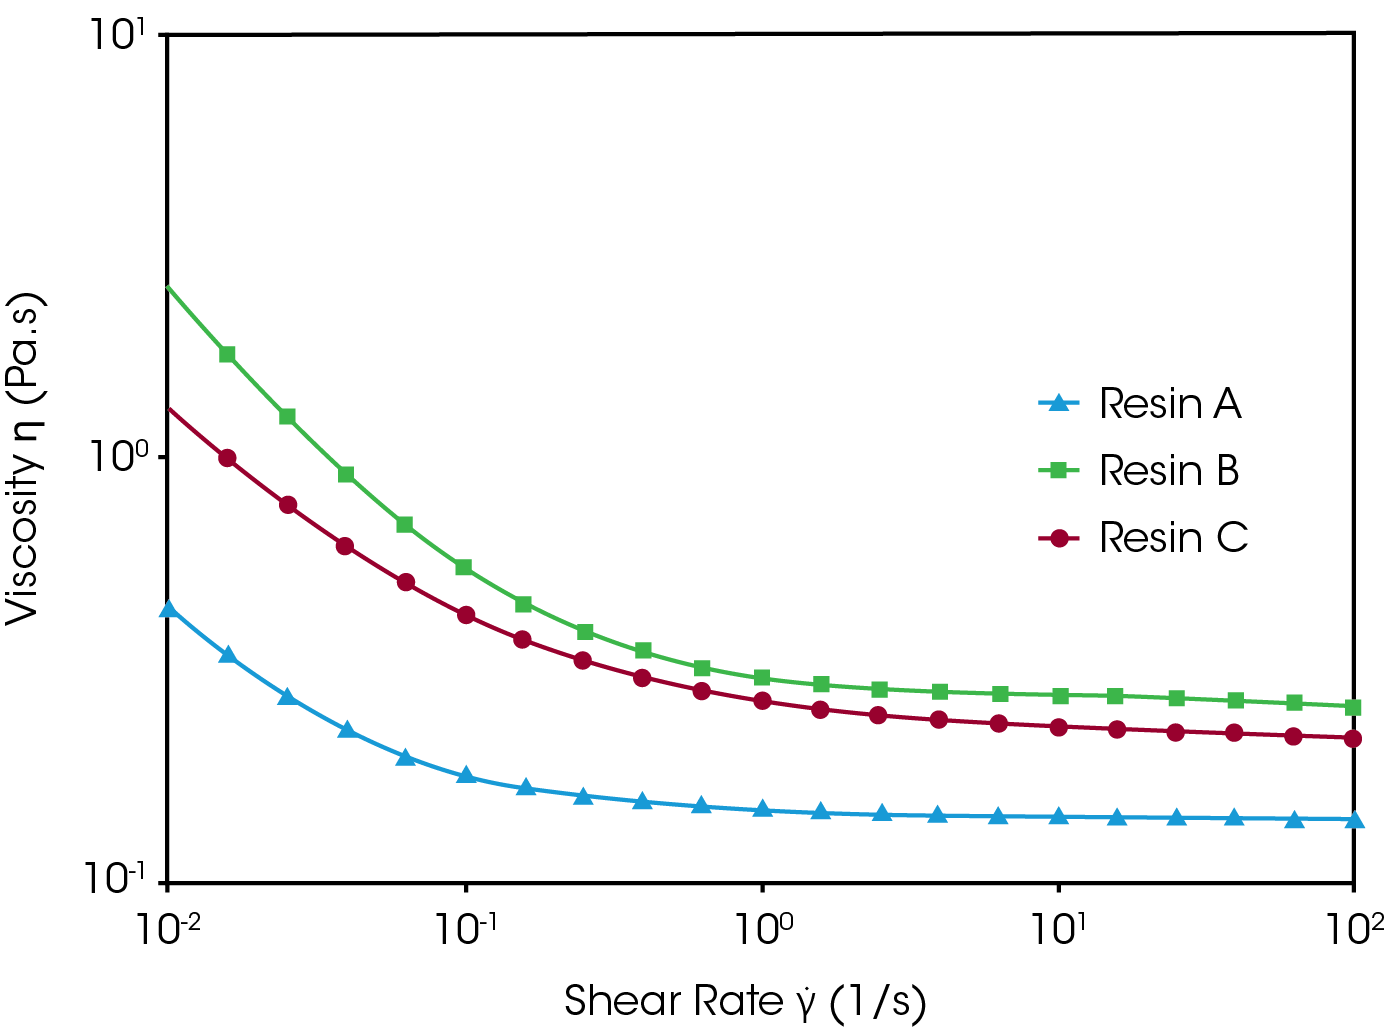 Figure 3. Flow sweep experiment conducted at 24 °C from 0.01-100 s-1. Viscosity is plotted as a function of shear rate for the three resins.